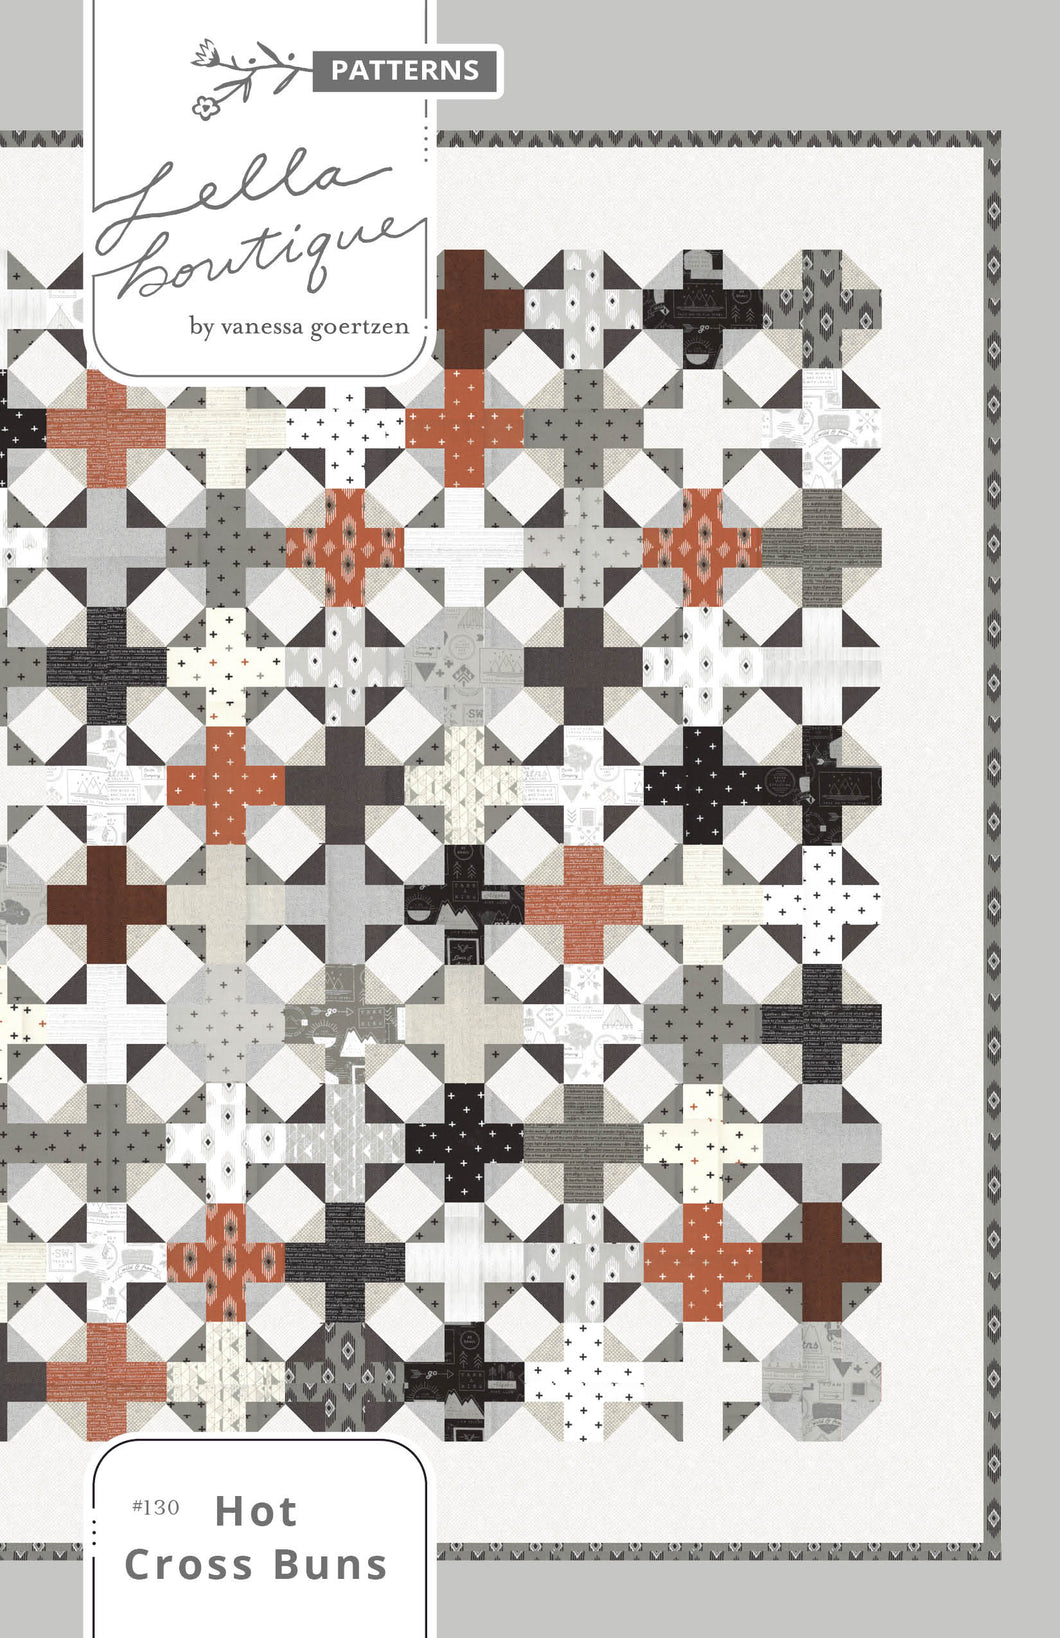 Hot Cross Buns plus sign quilt by Vanessa Goertzen of Lella Boutique. Make it with a Jelly Roll or Layer Cake. Fabric is Smoke & Rust by Lella Boutique for Moda Fabrics. Great boy quilt!